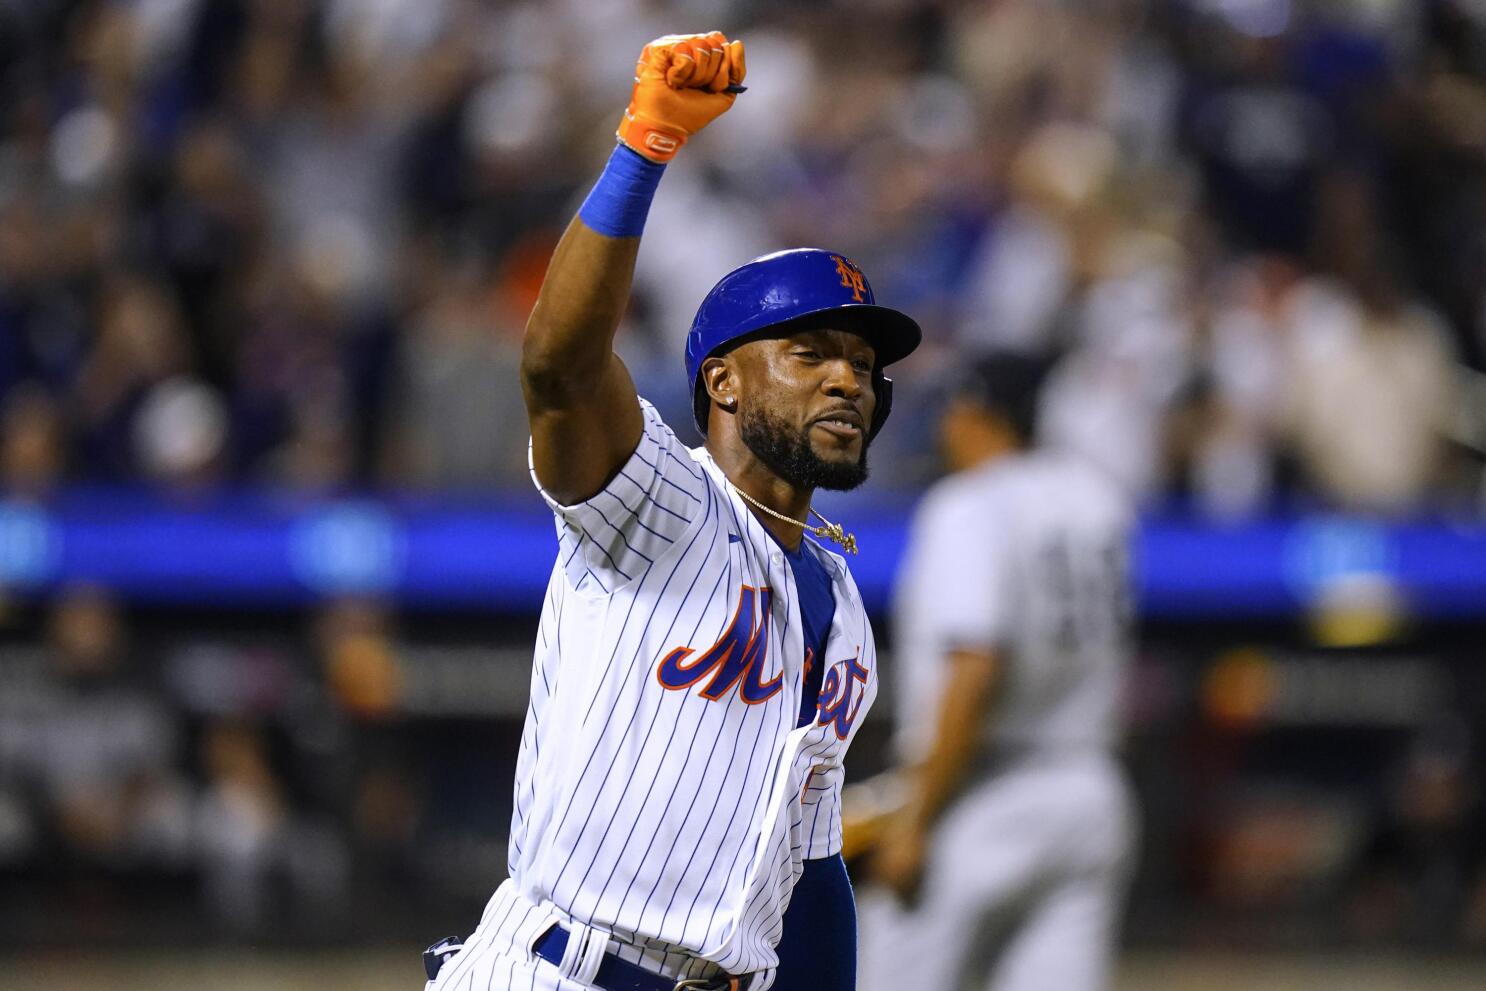 New York Mets - Welcome to New York, Starling Marte! We have